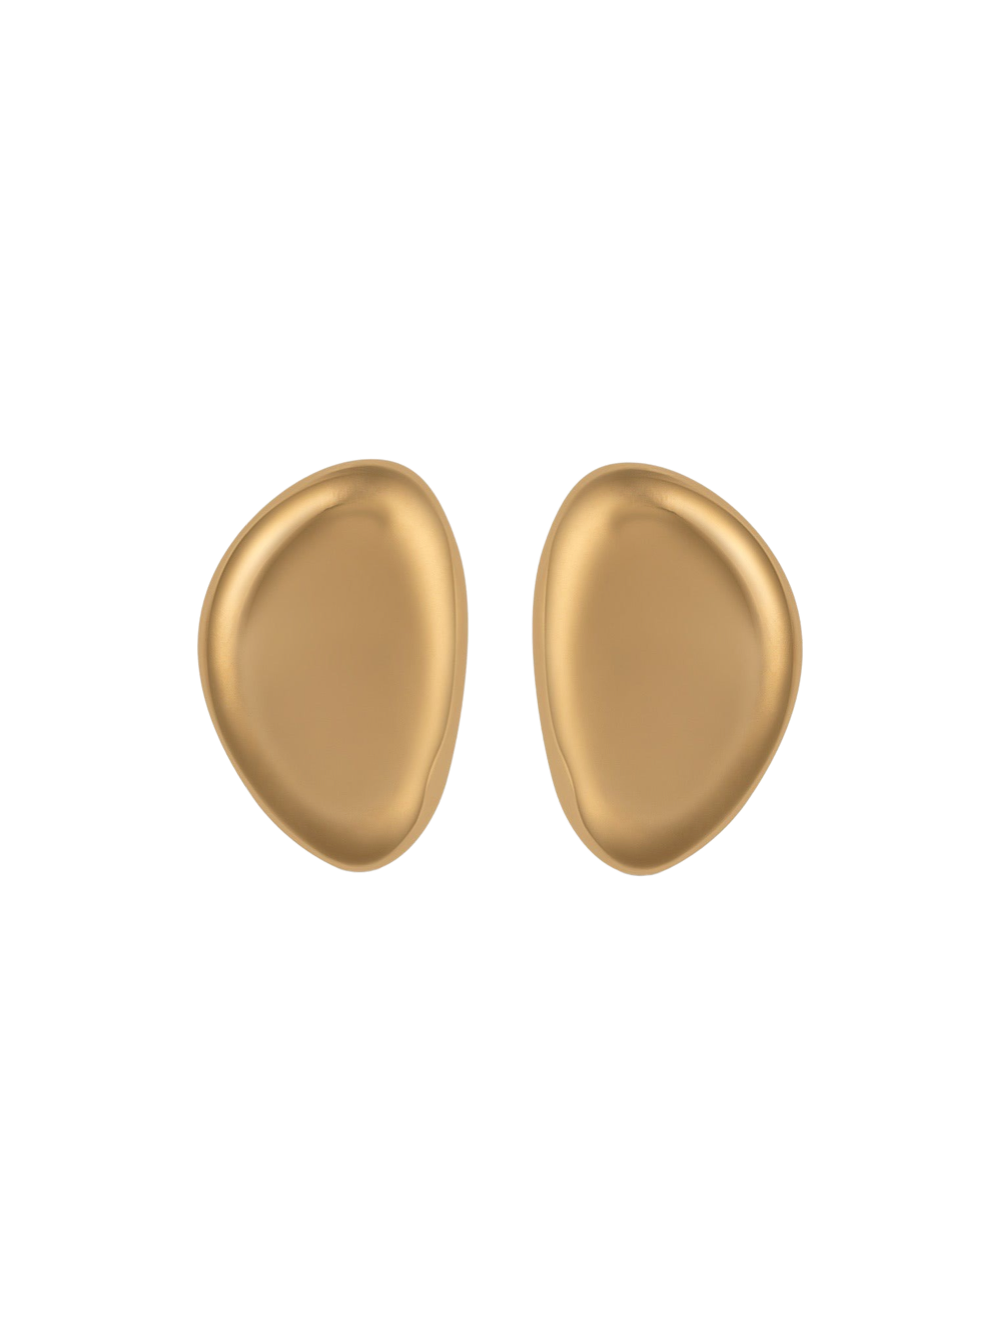 Christina Caruso Small Oval Earrings in Gold